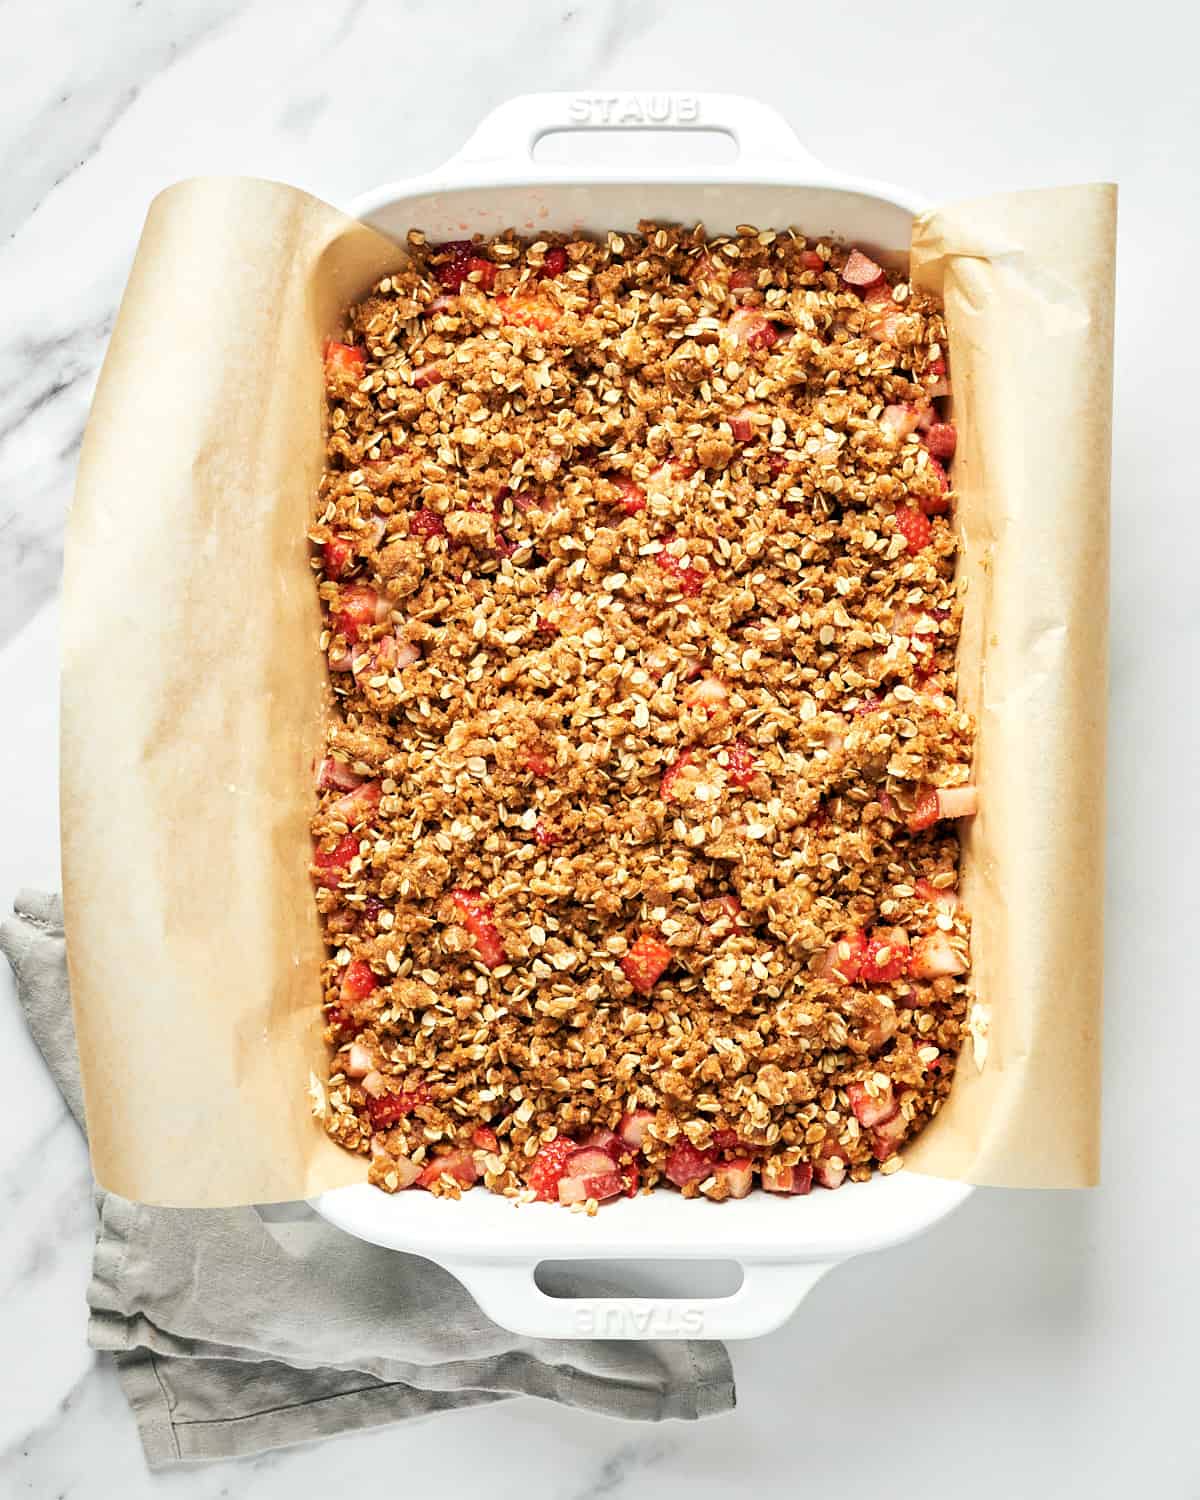 Overhead view of unbaked vegan strawberry rhubarb crumble bars in a rectangular baking dish.